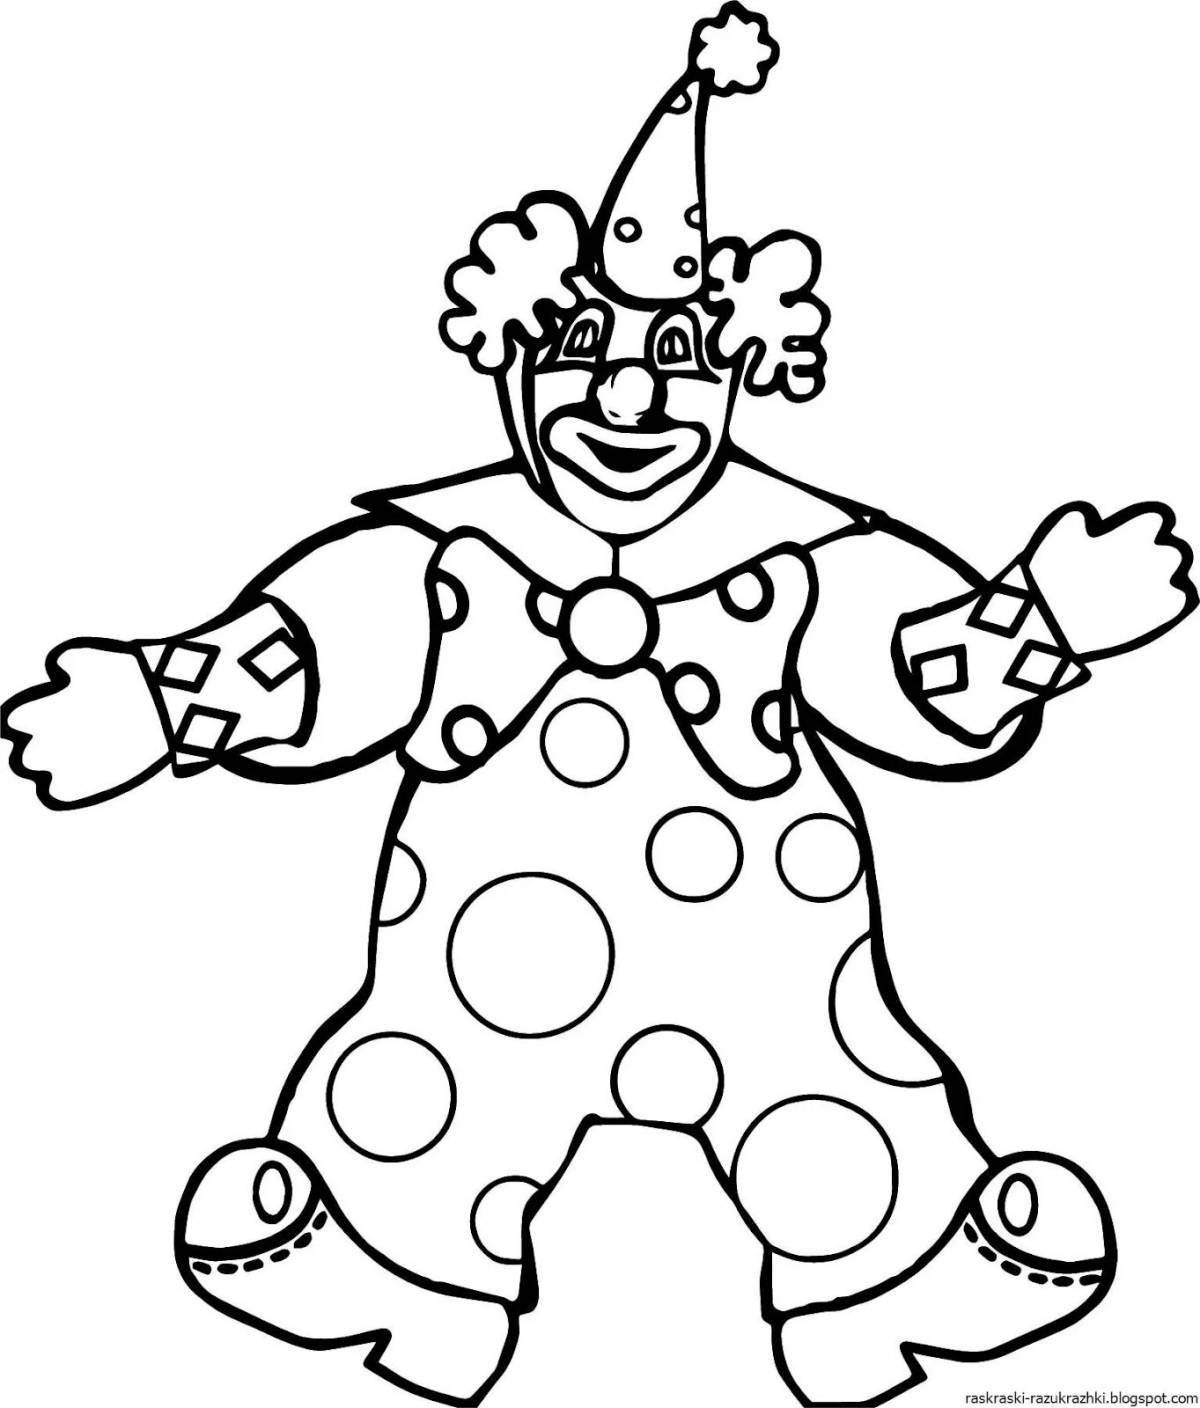 Fun coloring funny clown for kids